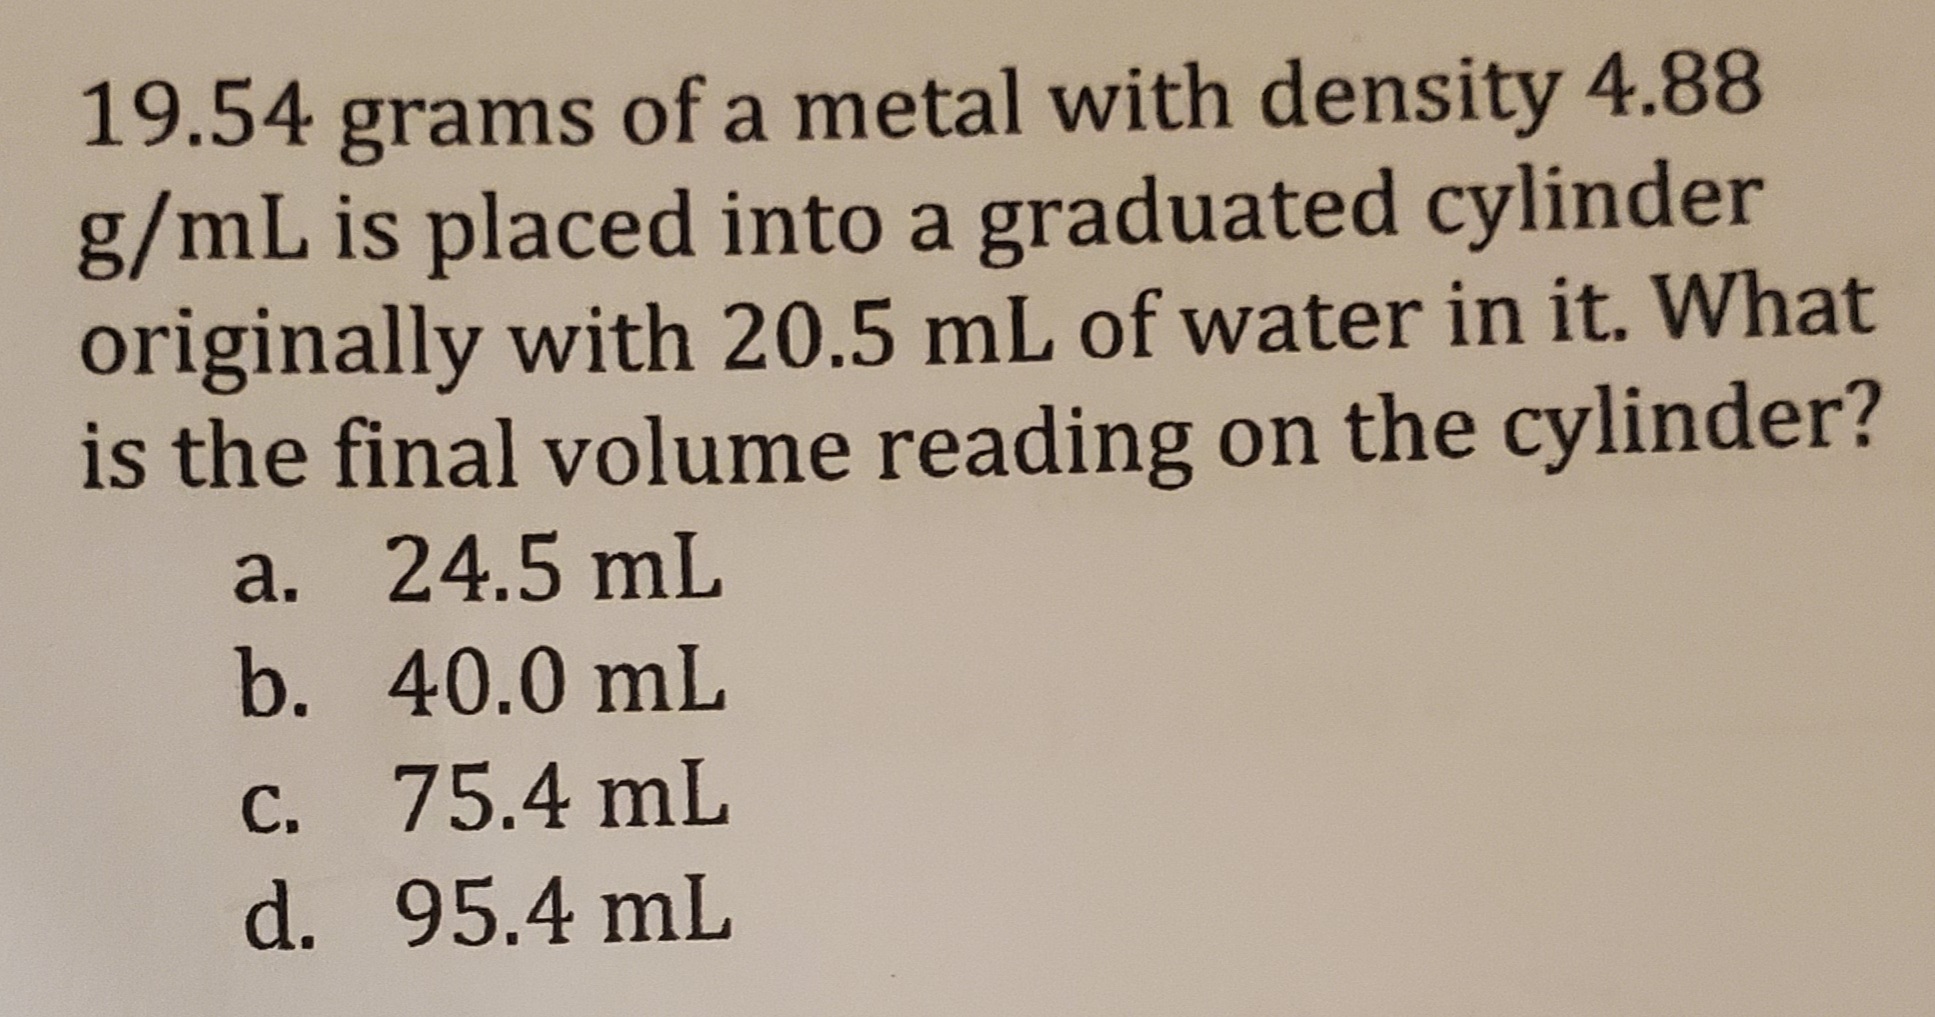 19.54 grams of a metal with density 4.88
g/mL is placed into a graduated cylinder
originally with 20.5 mL of water in it. What
is the final volume reading on the cylinder?
a. 24.5 mL
b. 40.0 mL
C. 75.4 mL
d. 95.4 mL
